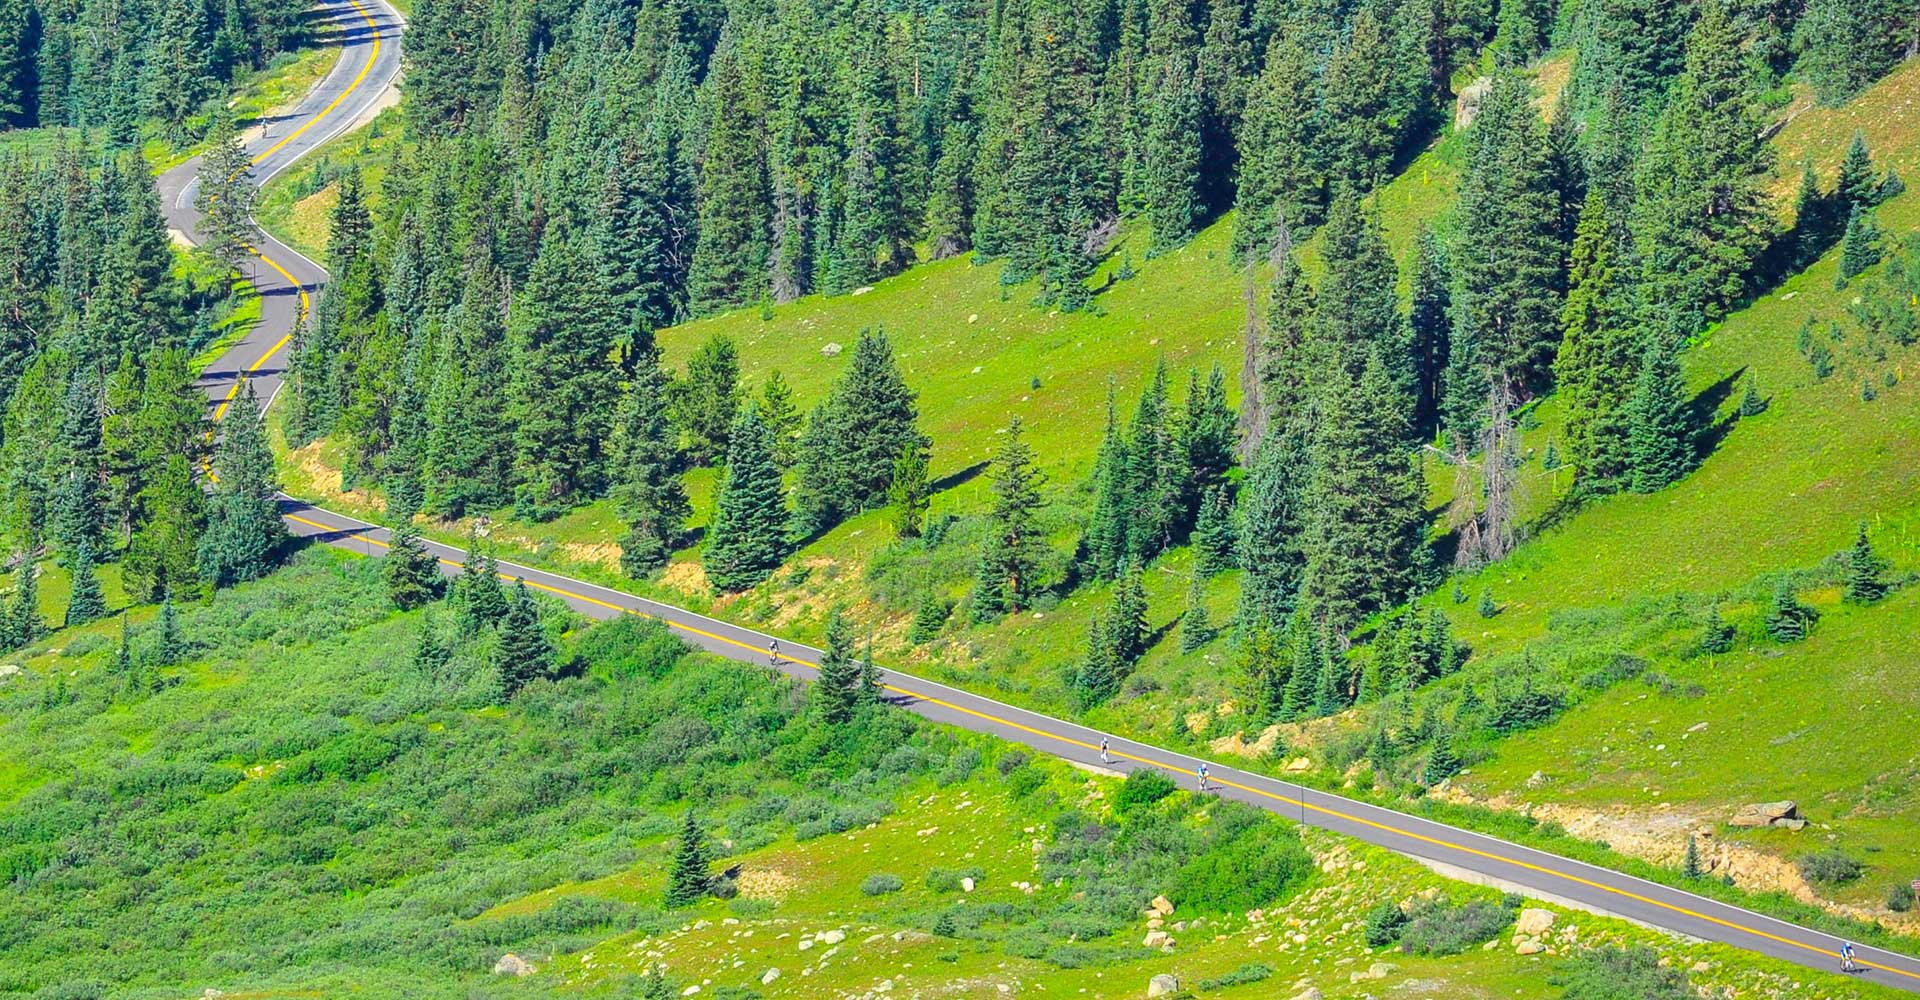 Cycling up Independence Pass